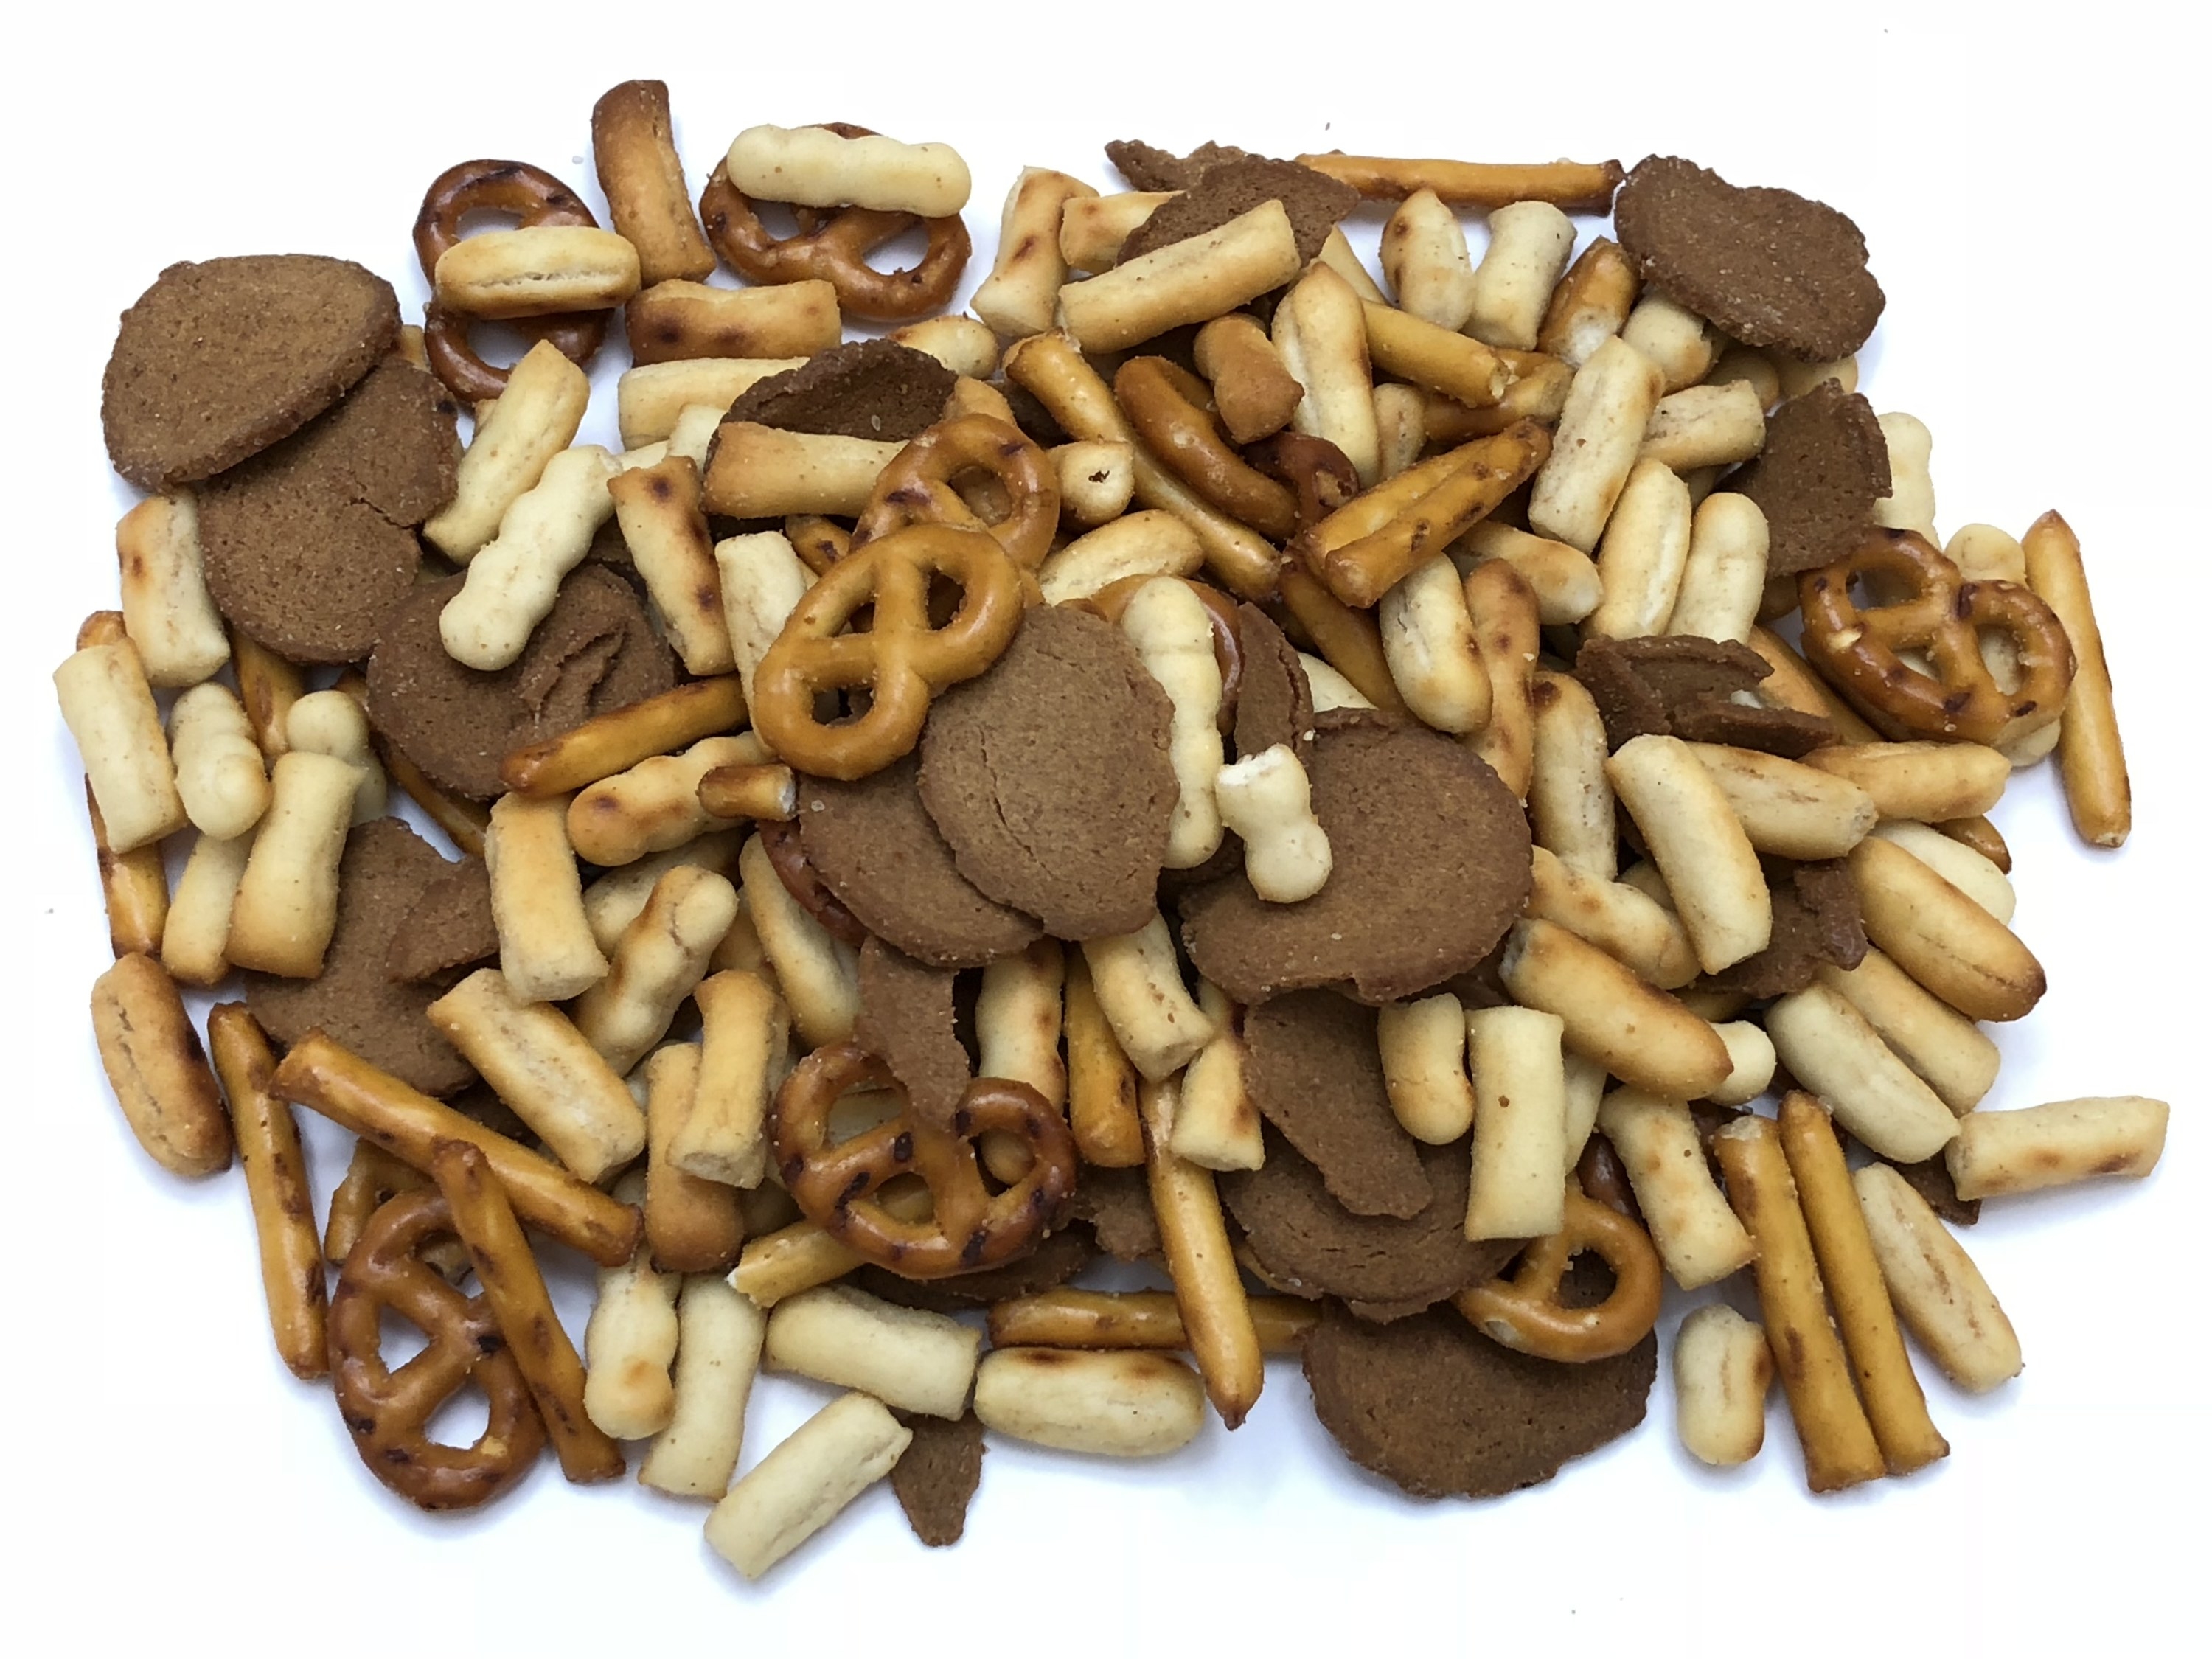 Mixed chips, pretzels, and bread sticks in snack mix